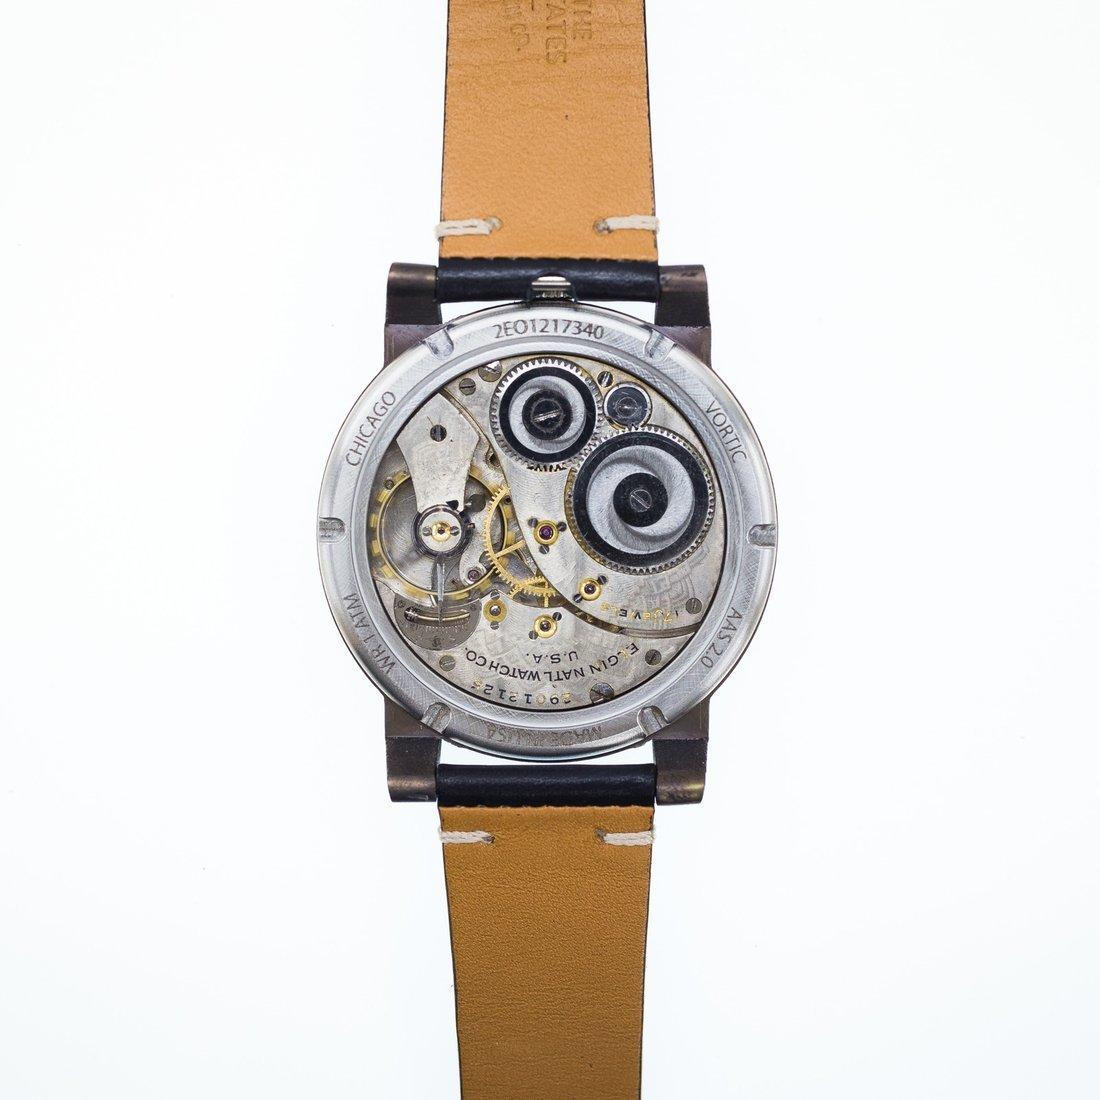 The Vortic Watch Company's Mission is to salvage, restore, and preserve an important part of United States history. Vortic fully restores these 100-year-old mechanisms and builds them into wristwatches to make them functional again and to preserve